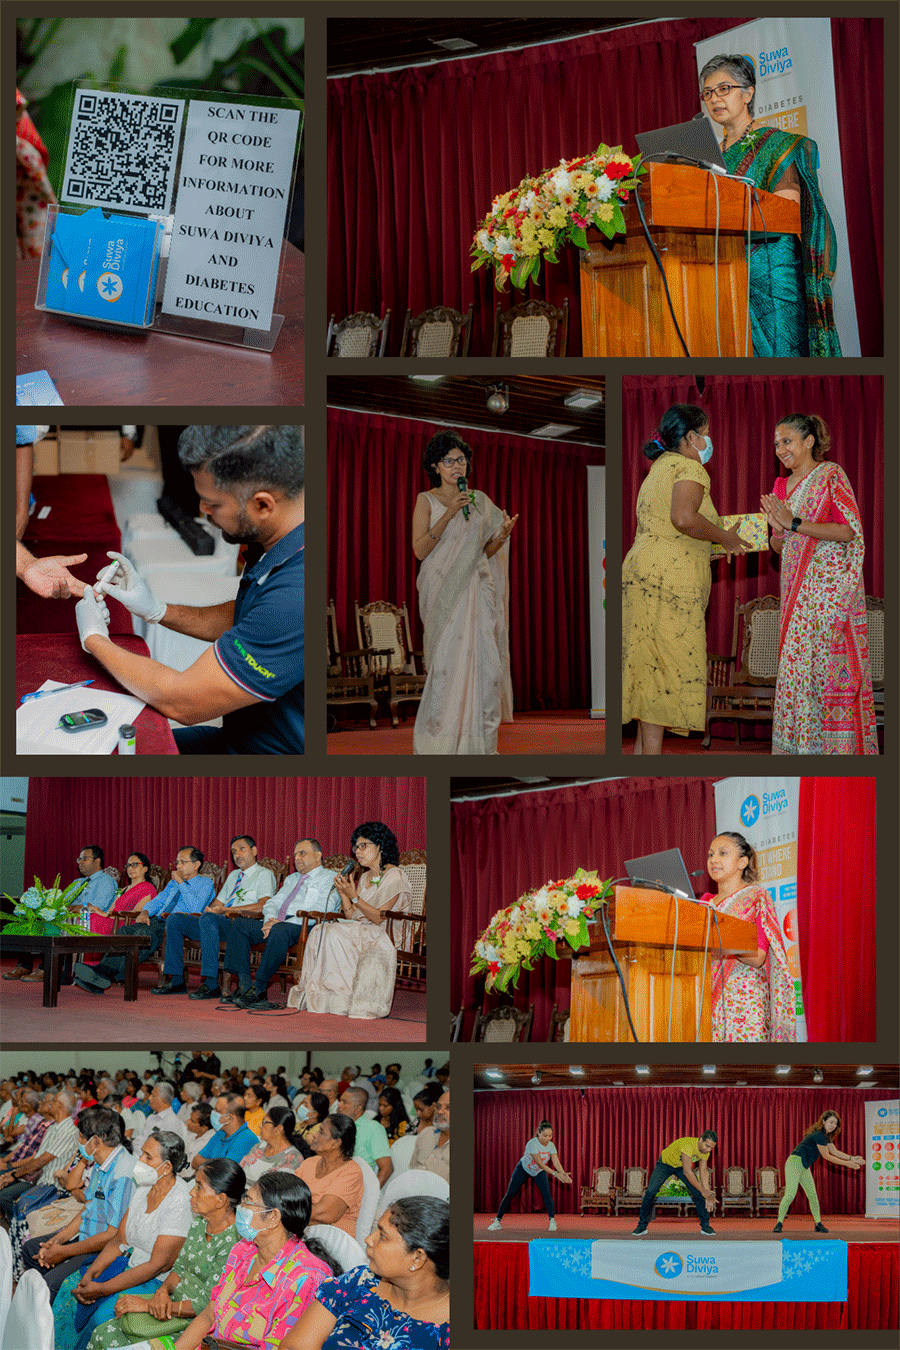 Suwa Diviyas first public event successfully concluded drawing over 300 participants